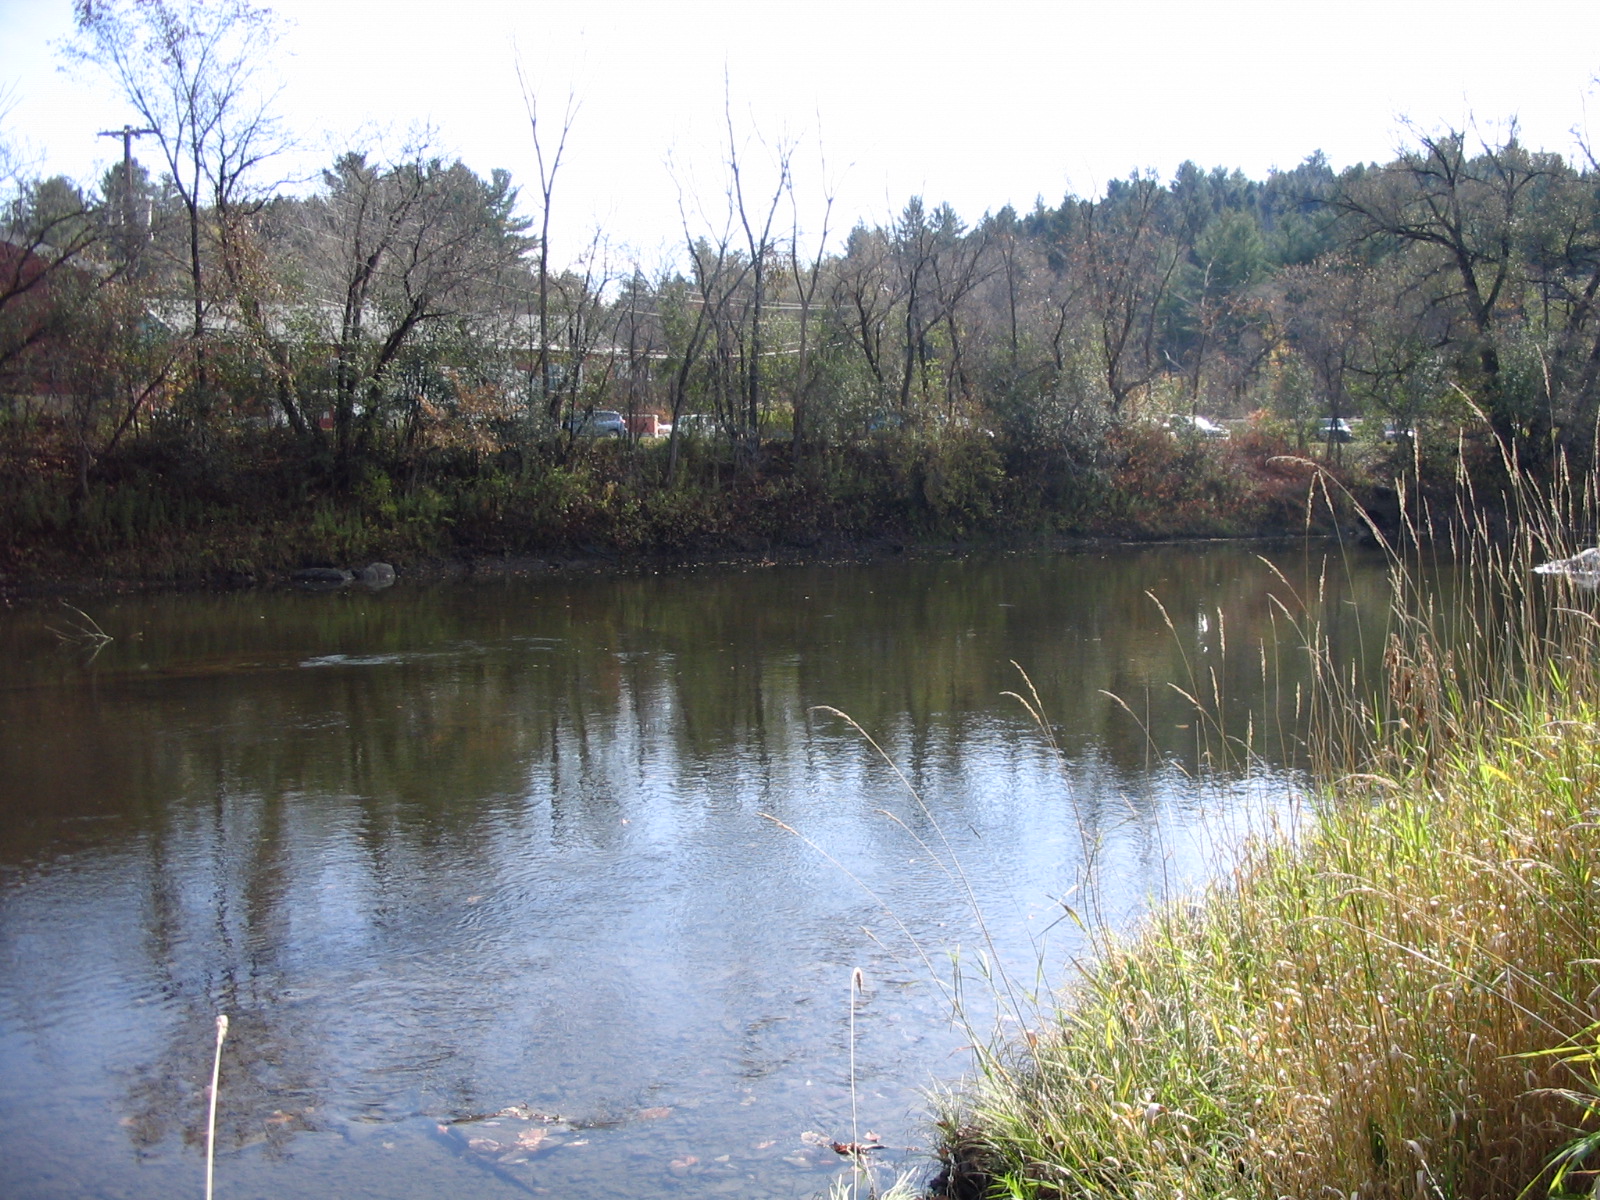 Photograph of the Winooski River at Montpelier, VT (MONV1) looking downstream